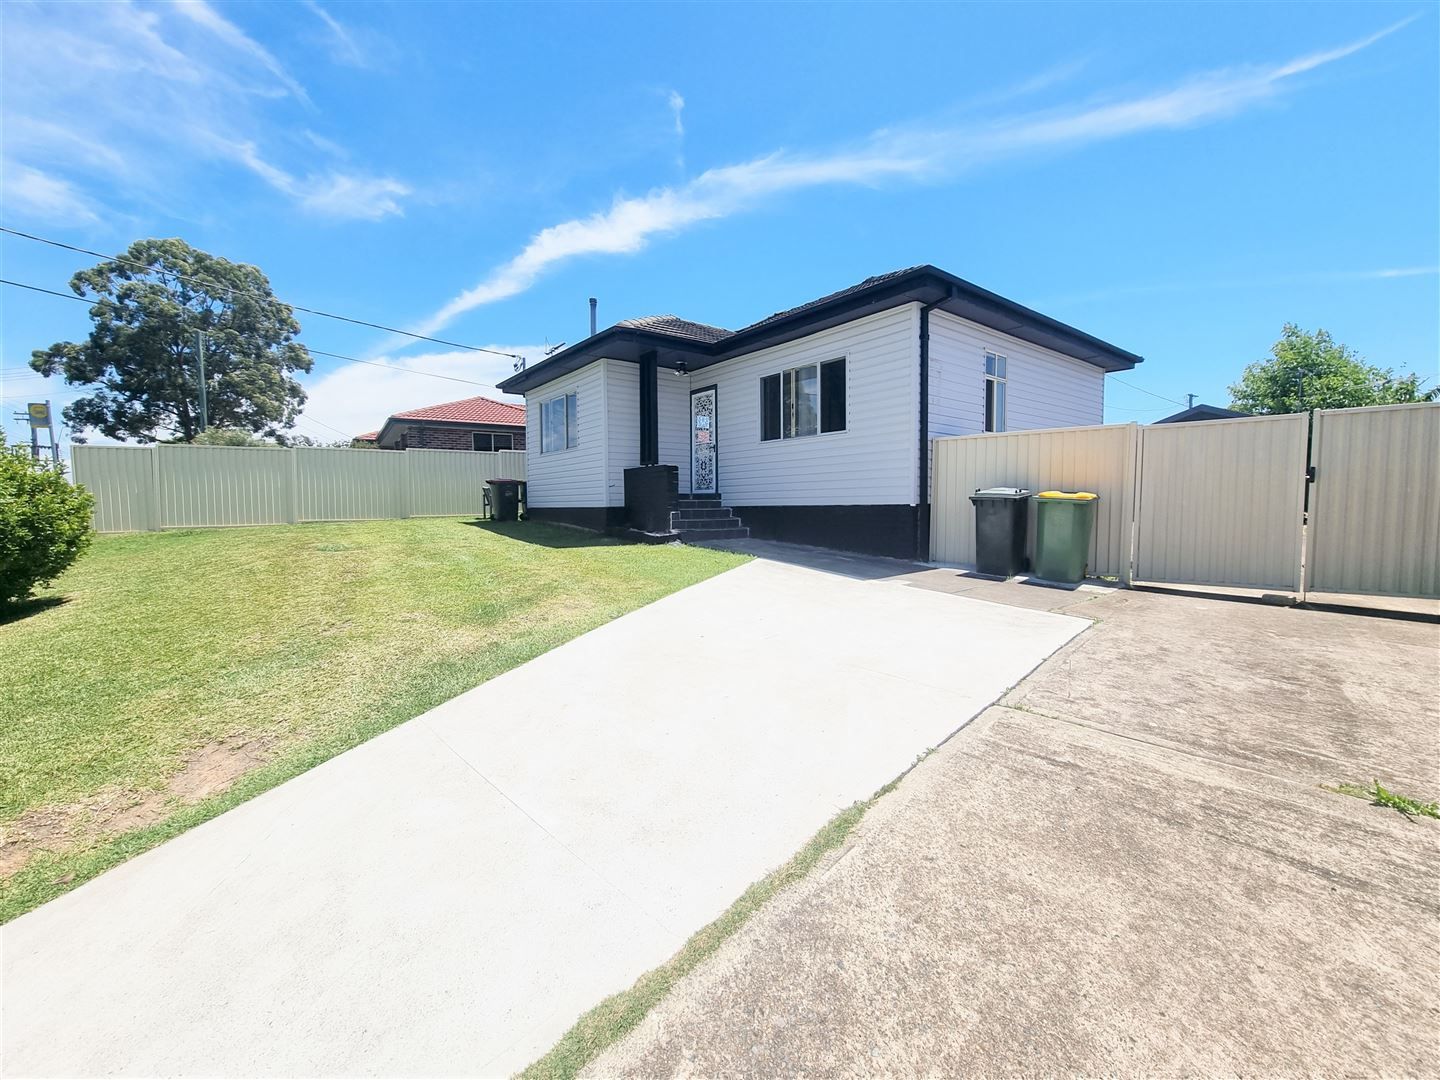 3 bedrooms House in 121 Townview Road MOUNT PRITCHARD NSW, 2170